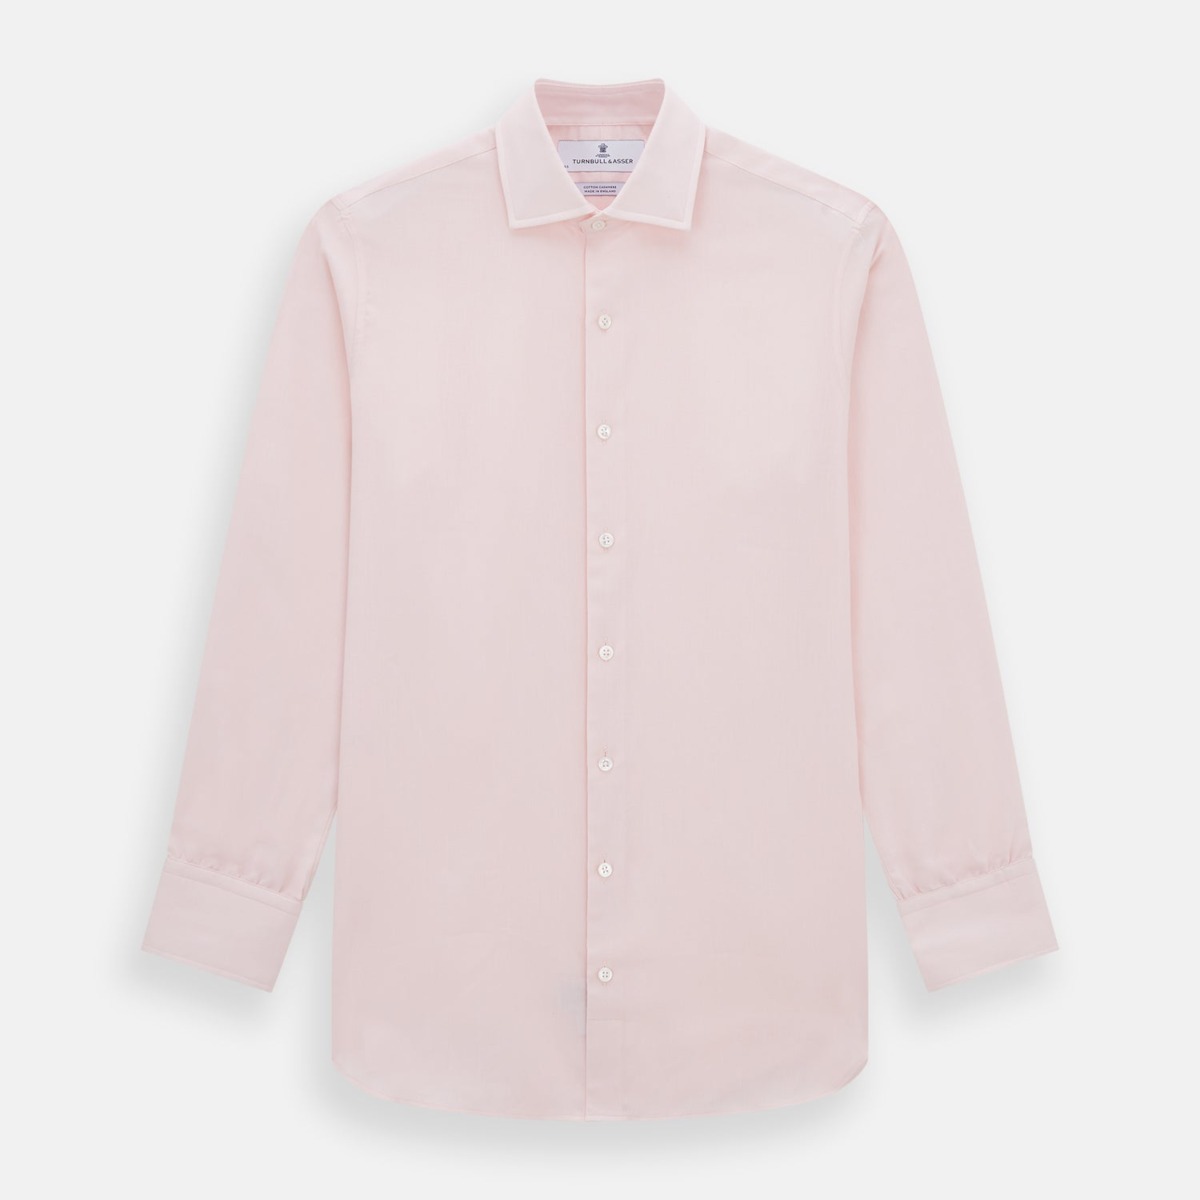 Turnbull & Asser Gents Shirt in Pink - Turnbull And Asser GOOFASH